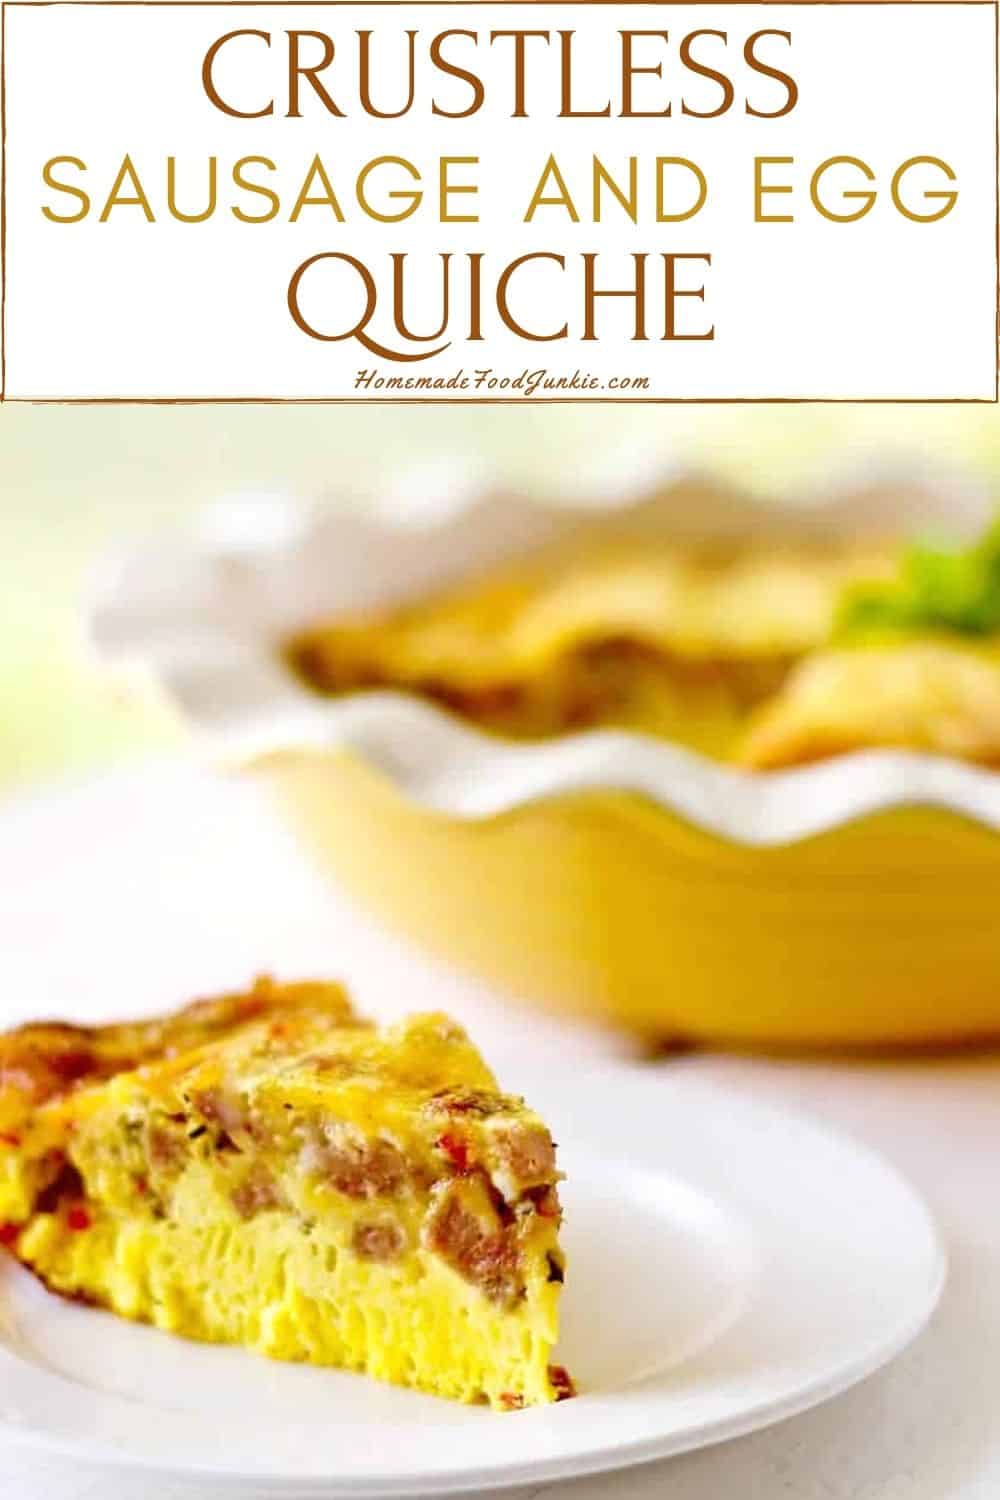 Crustless Sausage And Egg Quiche-Pin Image